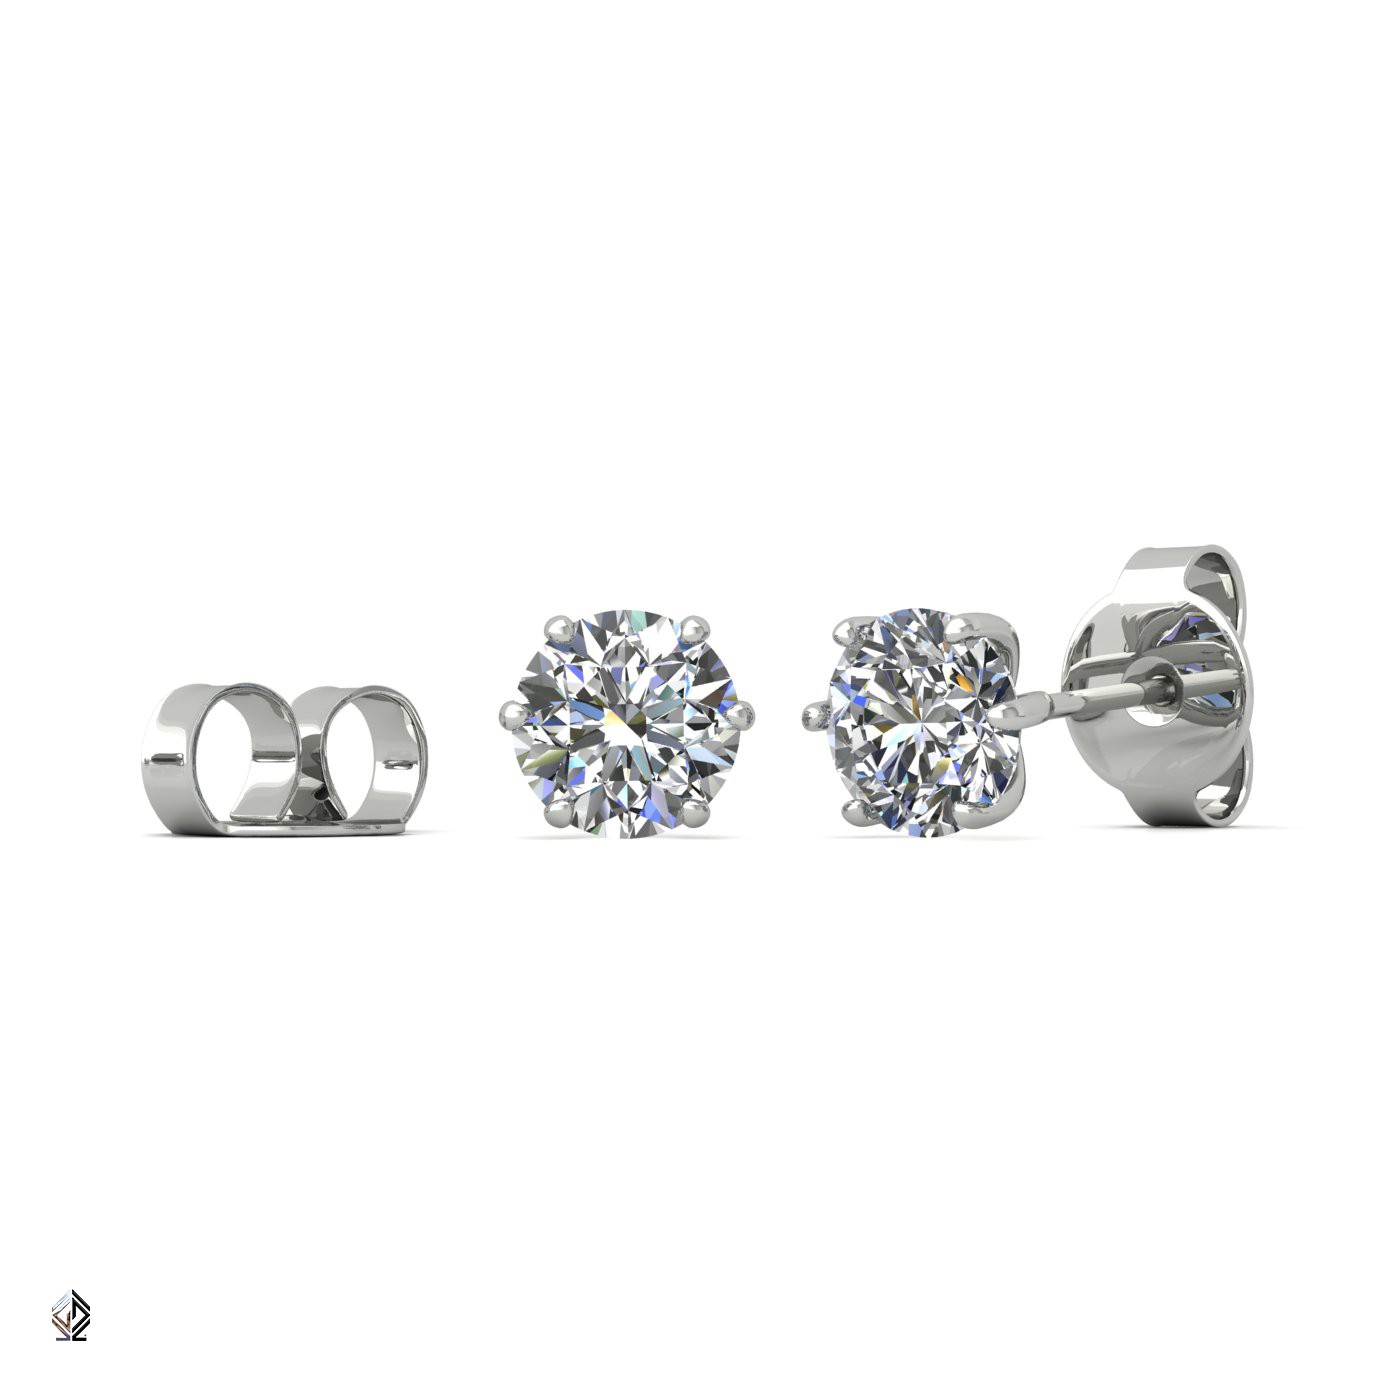 18k white gold 1.0 ct each (2,0 tcw) 6 prongs round shape diamond earrings Photos & images